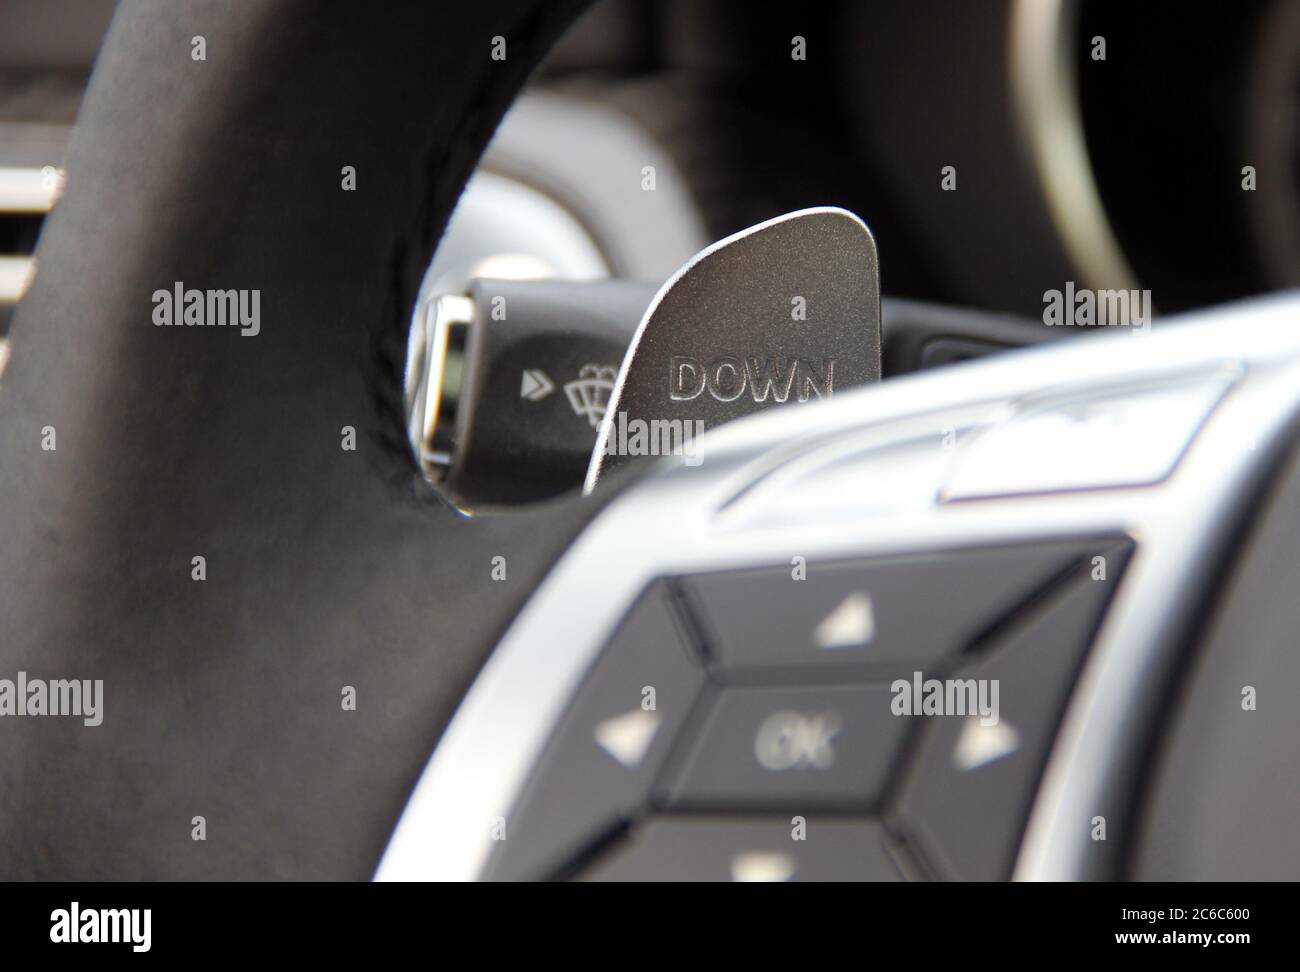 https://c8.alamy.com/comp/2C6C600/shift-paddles-steering-wheel-with-shift-paddles-manual-gear-changing-stick-on-a-cars-steering-wheel-2C6C600.jpg